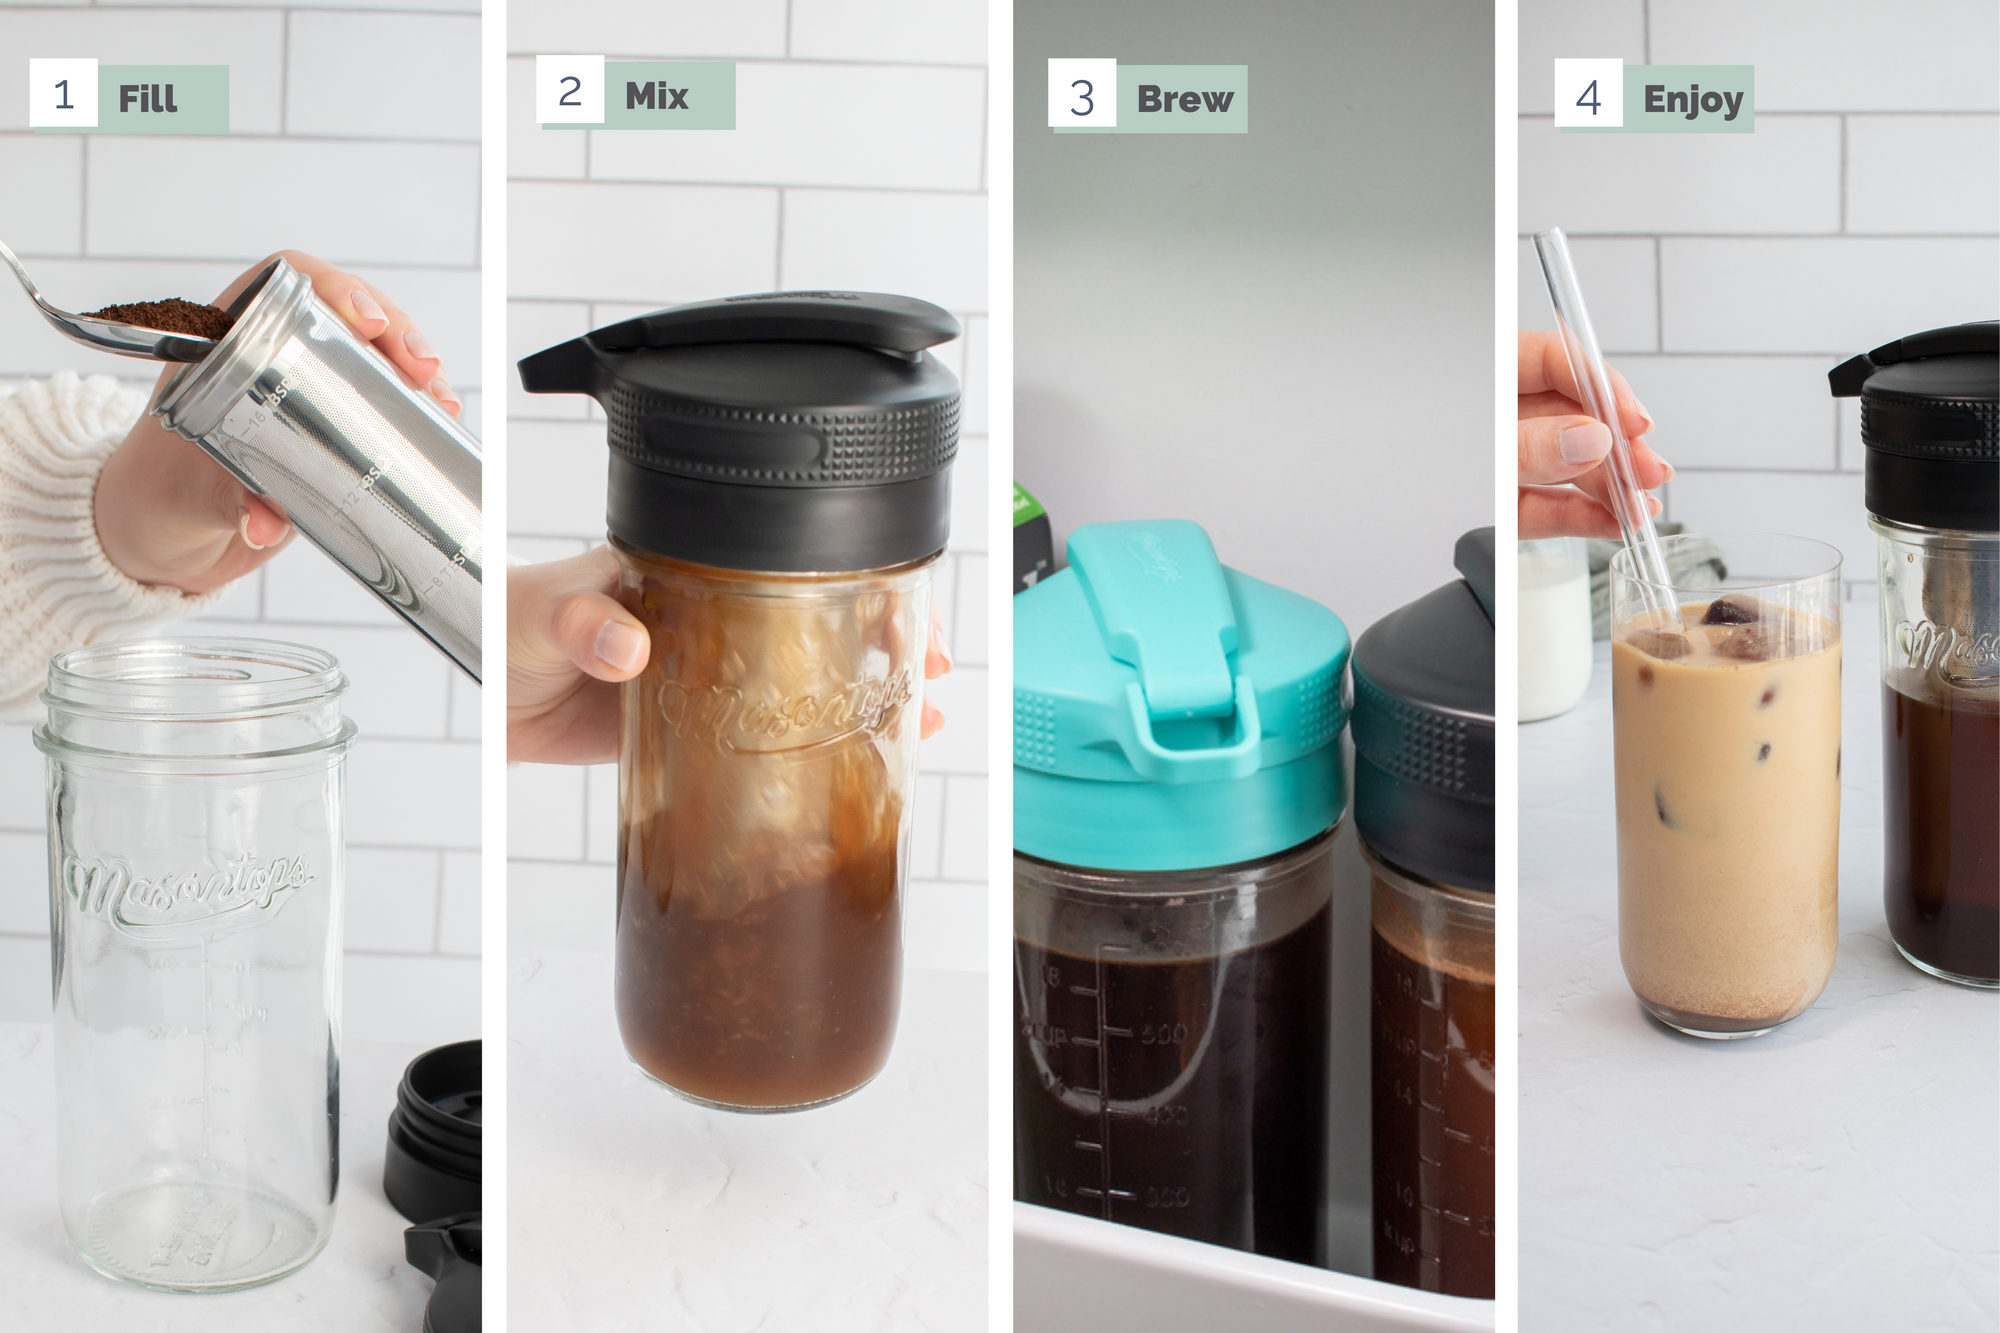 Cold Brew Kit - Make your own delicious cold brew drinks at home